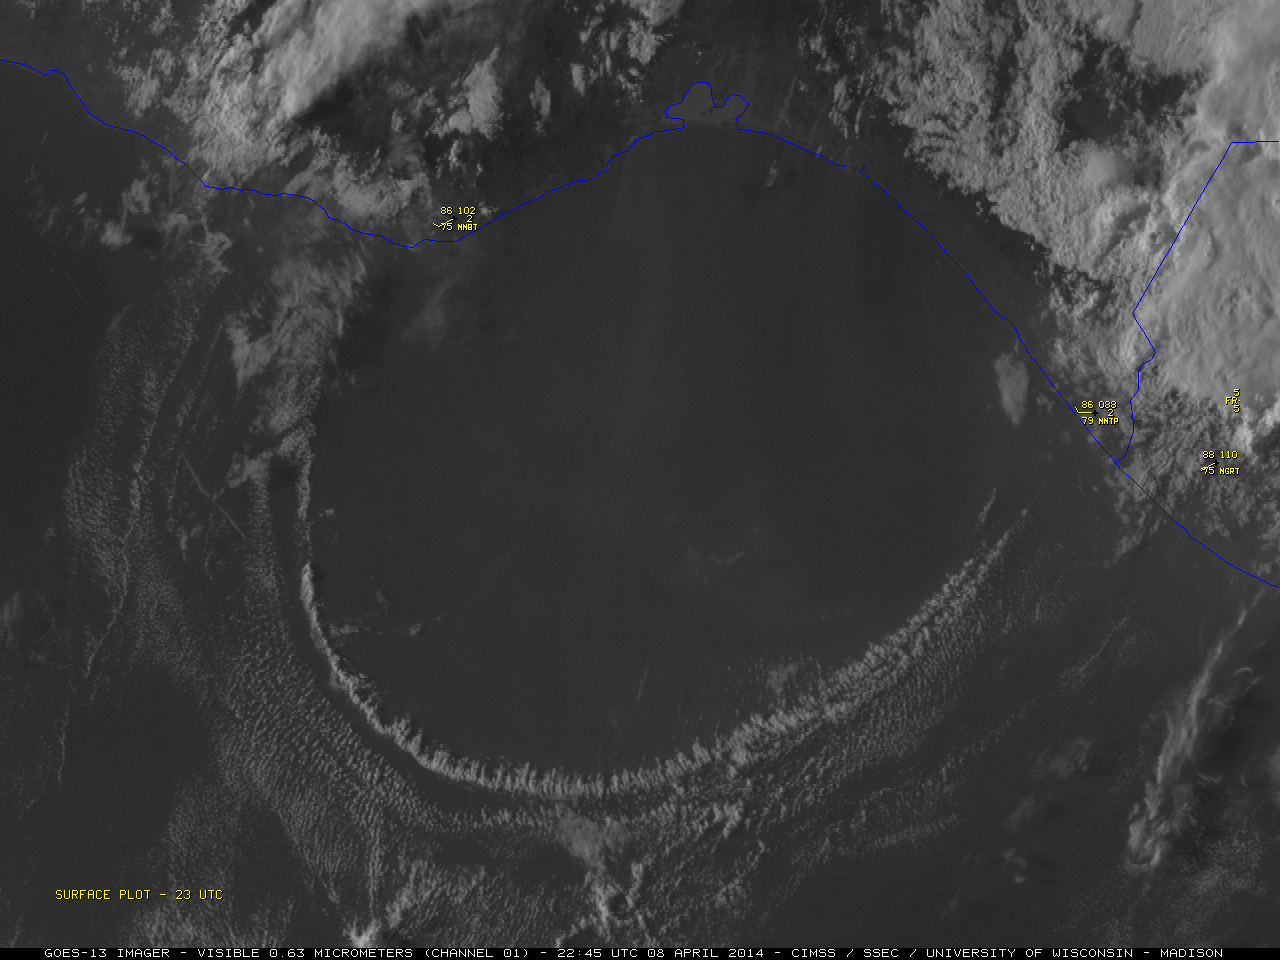 GOES-13 0.63 Âµm visible channel images (click to play animation)